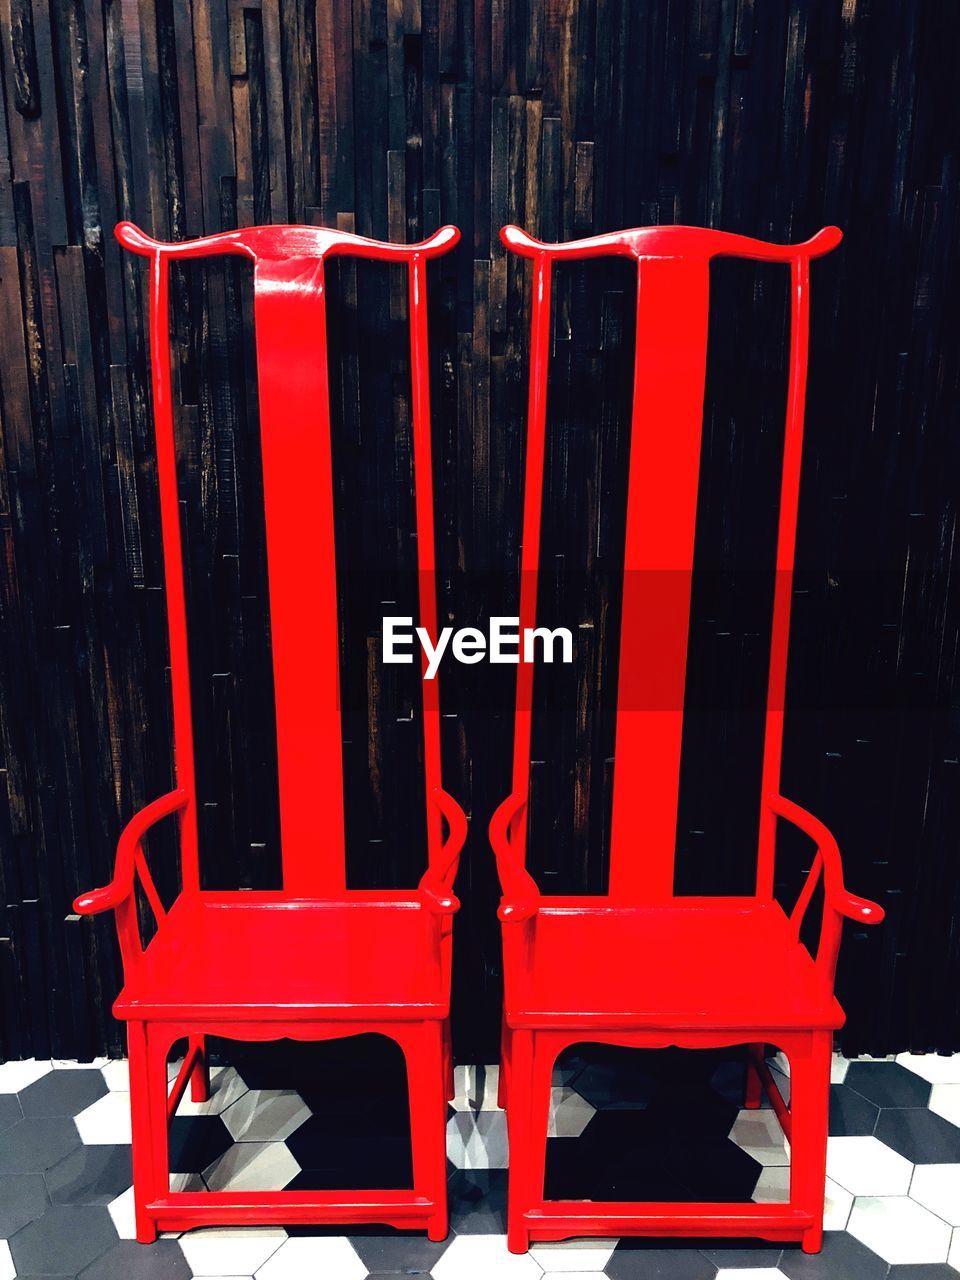 CLOSE-UP VIEW OF RED CHAIRS